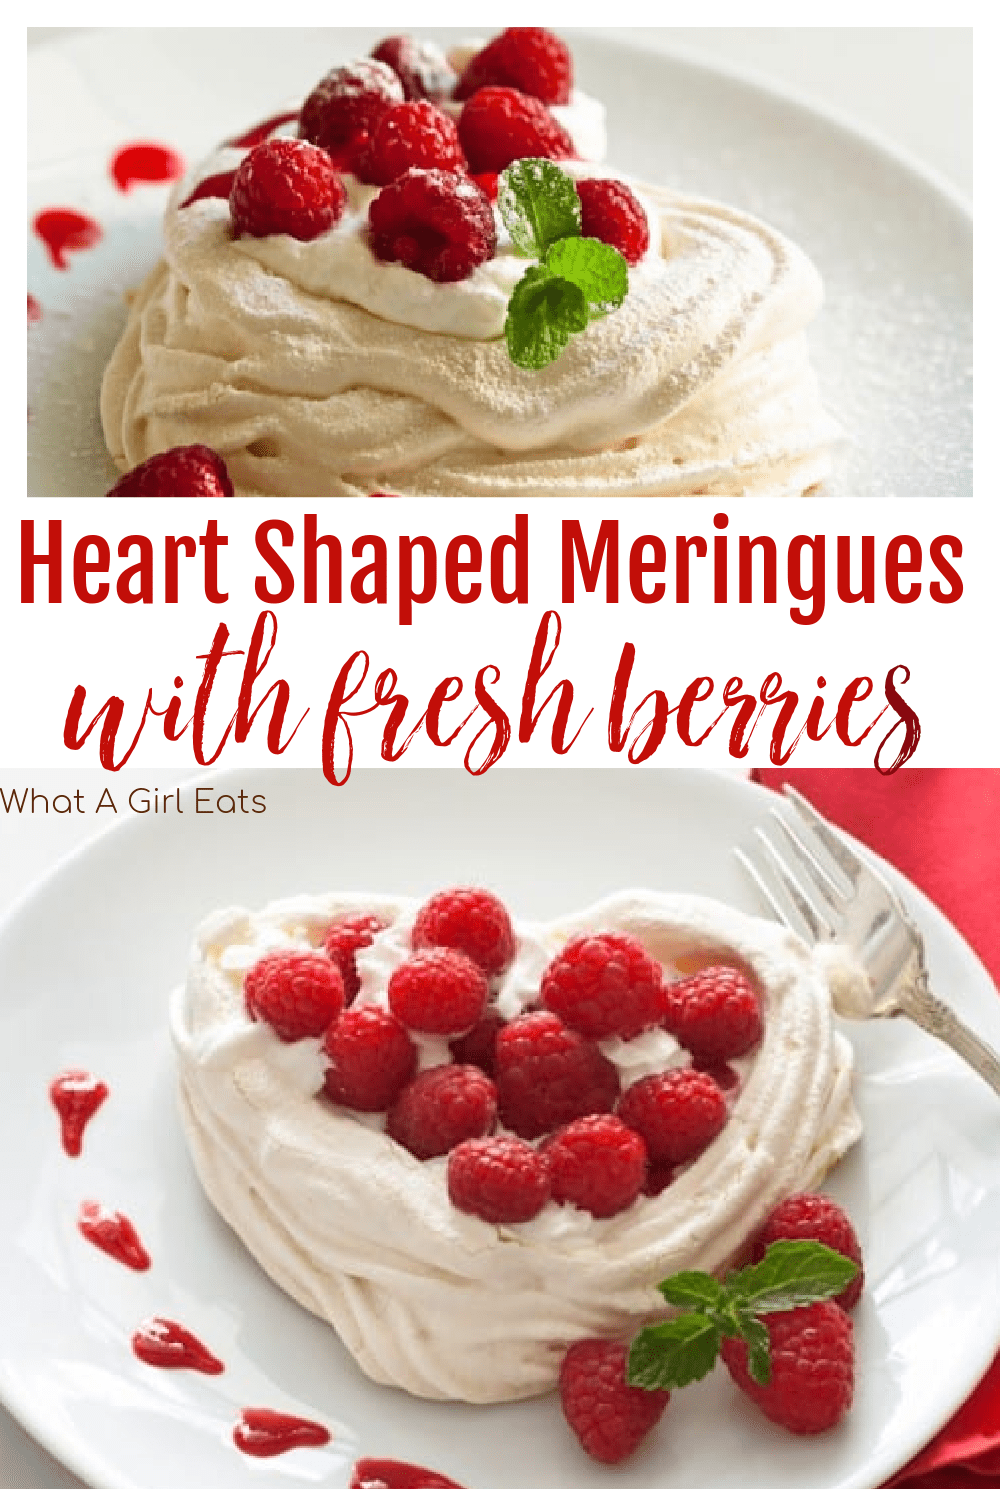 Heart shaped meringues with fresh berries and whipped cream is a lovely make-ahead dessert for Valentine's Day